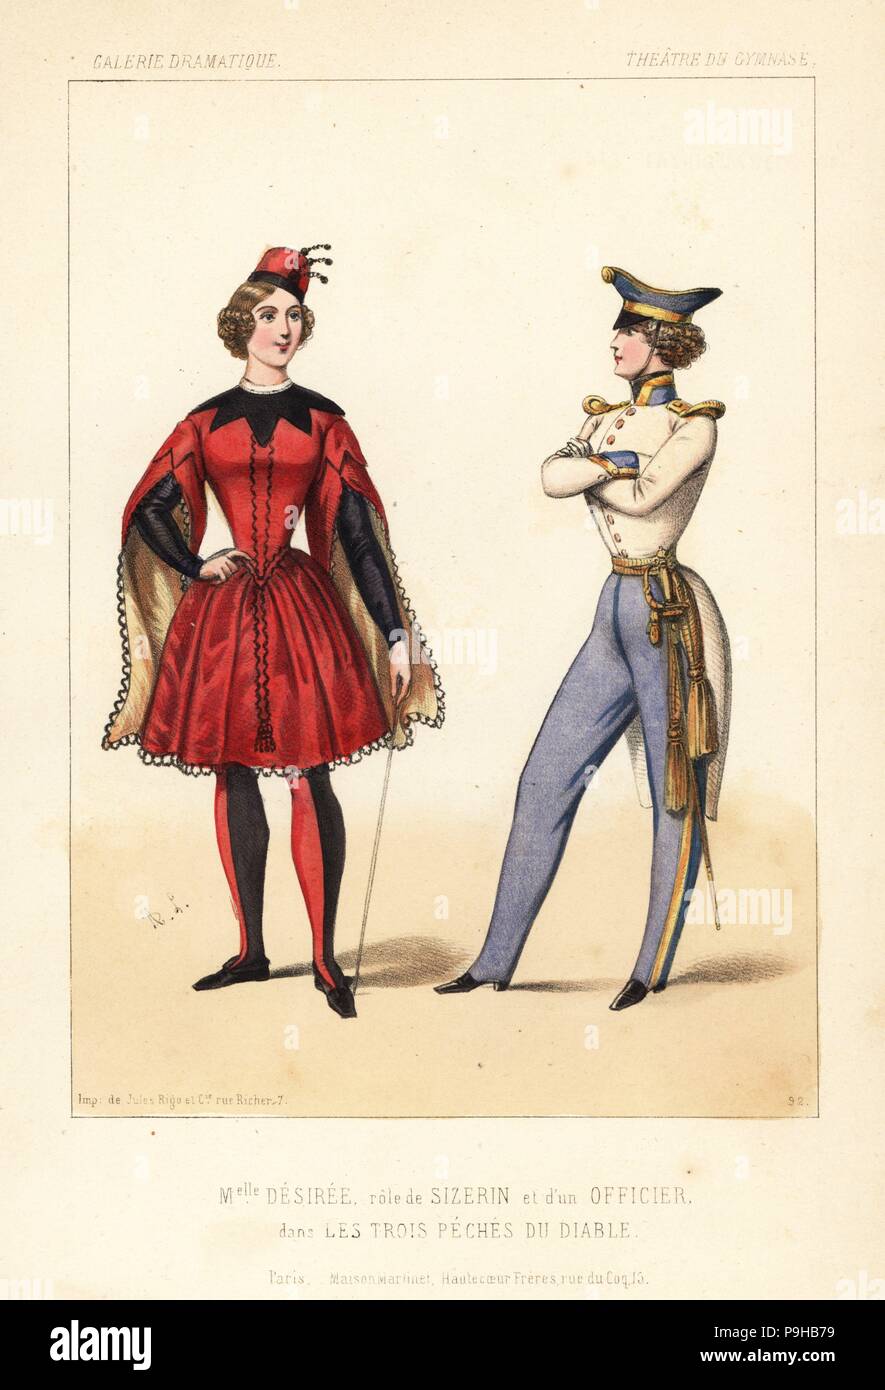 Actress Mlle. Desiree as Sizerin and an officer in Les Trois Peches du Diable by Charles Varin and Lubize (Pierre-Henri Martin), Theatre du Gymnase, 1844. Handcoloured lithograph after an illustration by Alexandre Lacauchie from Victor Dollet's Galerie Dramatique: Costumes des Theatres de Paris, Paris, 1845. Stock Photo